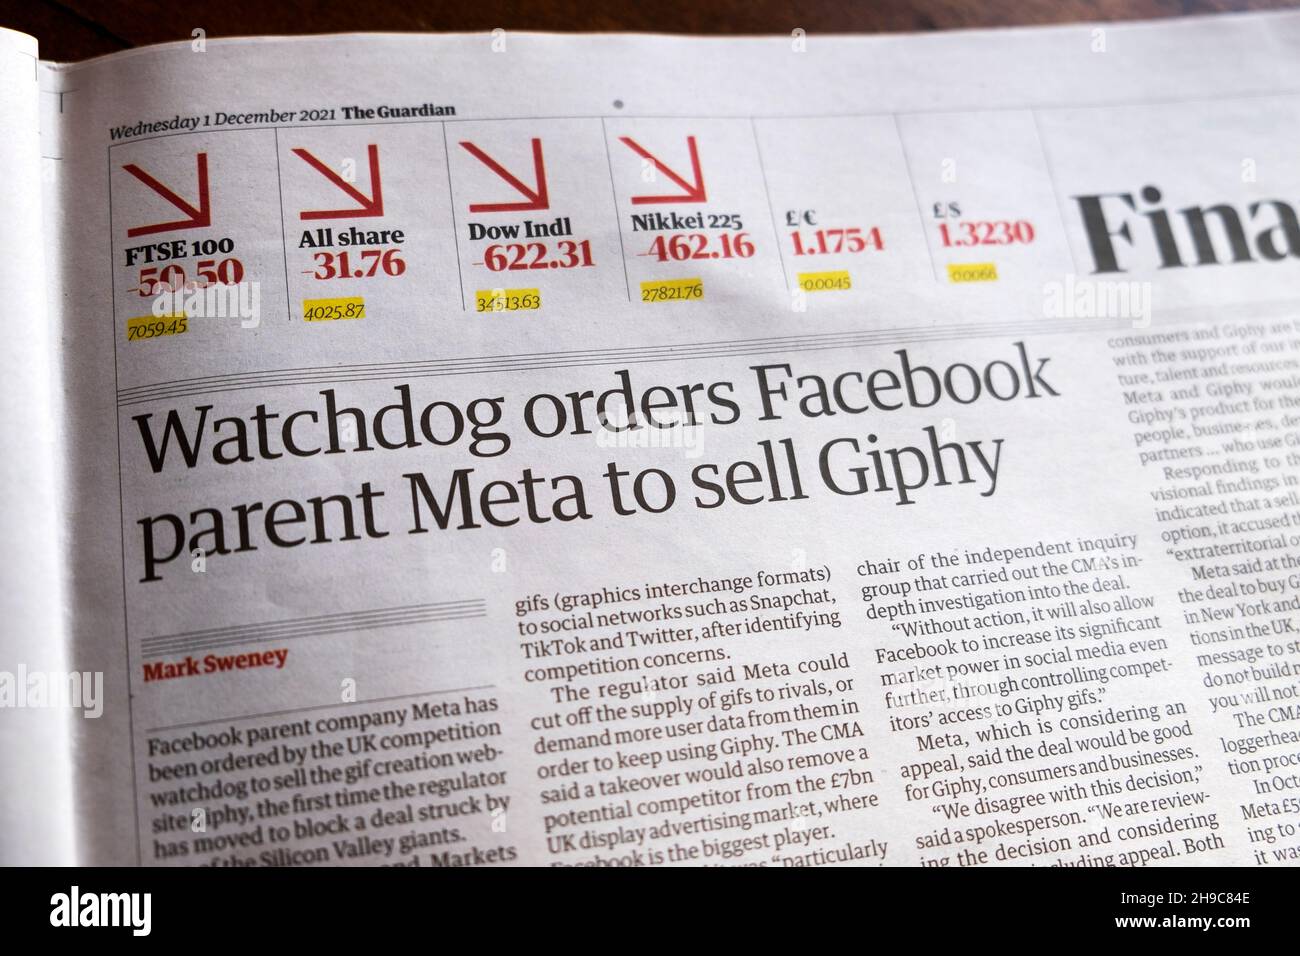 'Watchdog orders Facebook parent Meta to sell Giphy' Guardian Financial newspaper headline clipping 1 December 2021 London UK Stock Photo